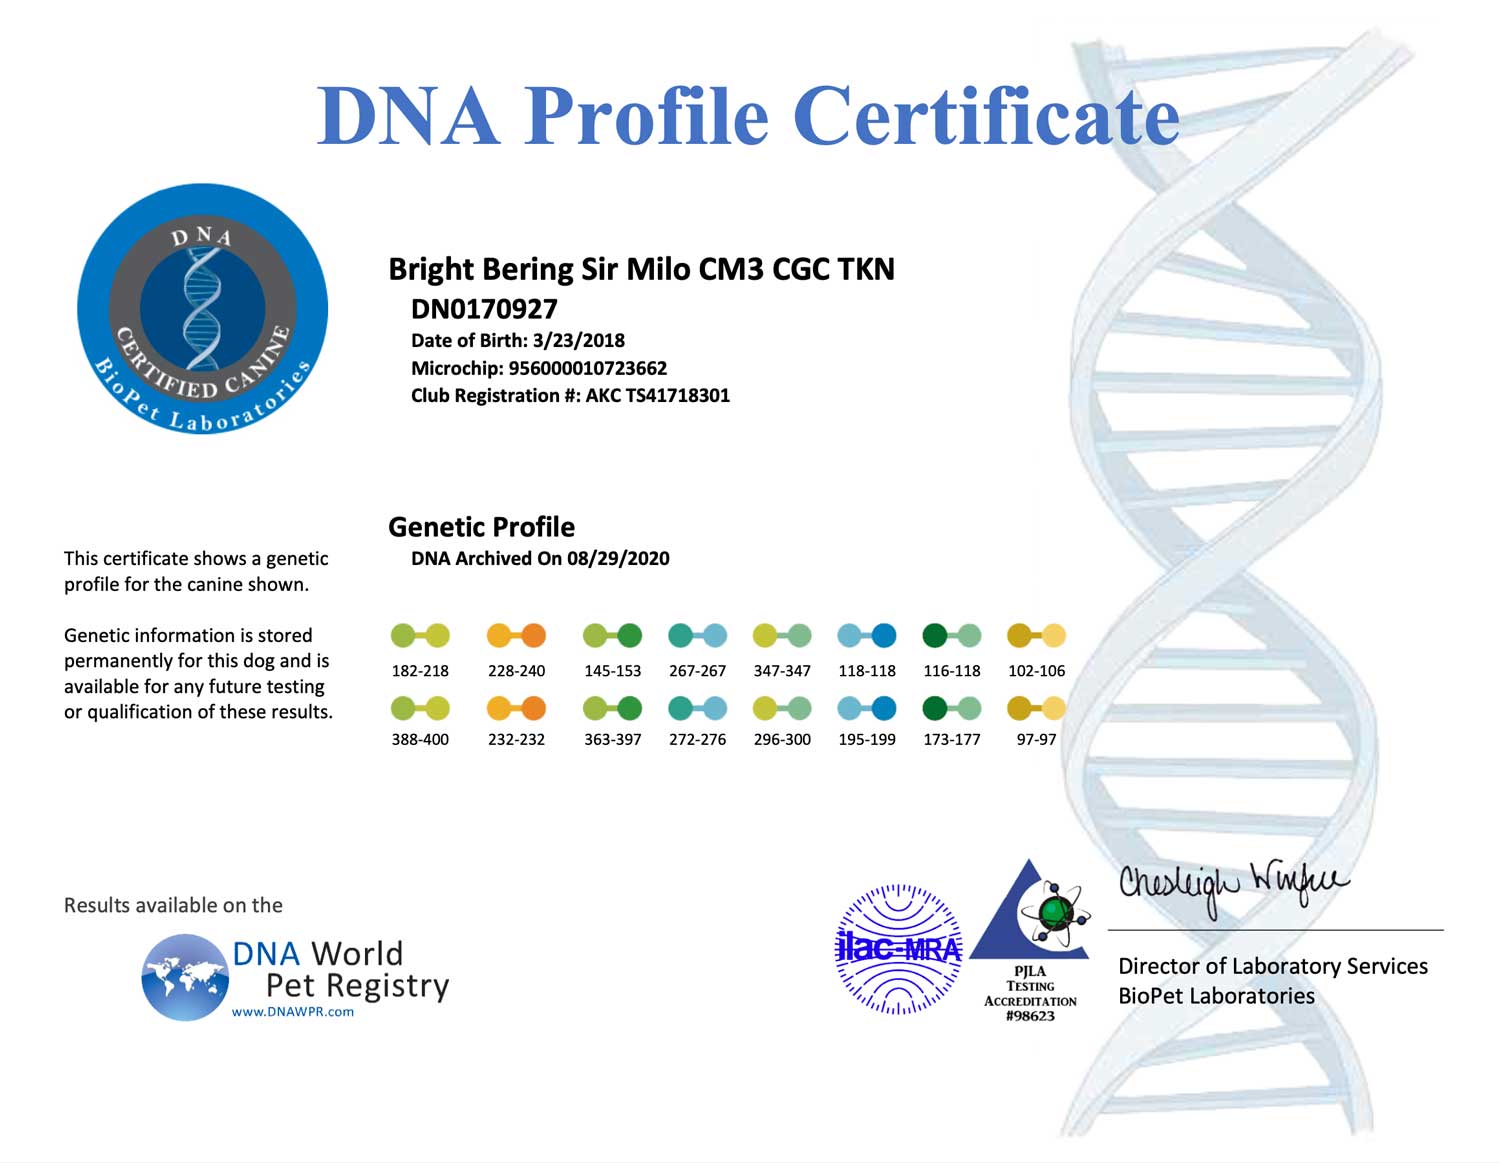 Rocky Mountain Biewer Terriers DNA Profile Certificate for Bright Bering